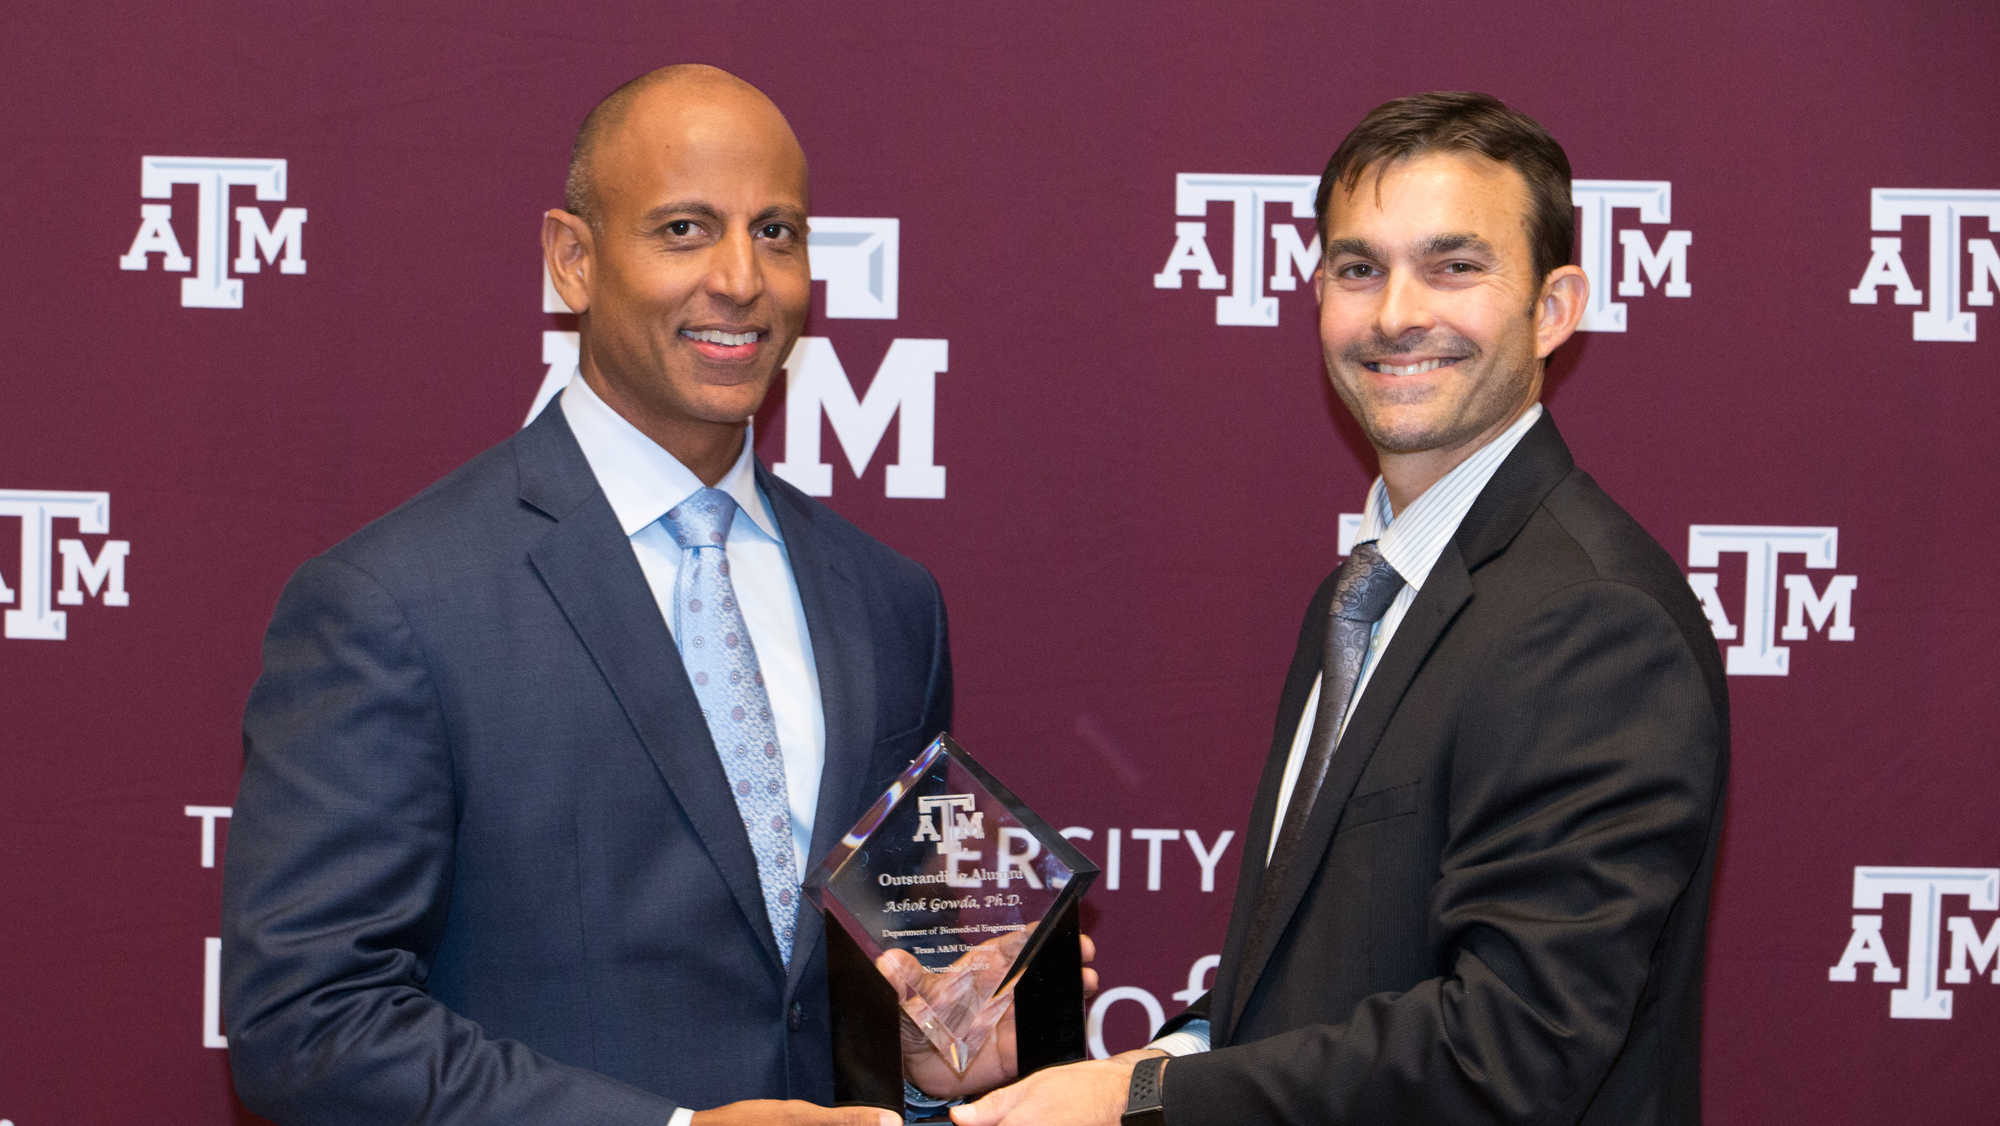 Two men in suits standing in front of maroon banner with white Department of Biomedical Engineering logo. They are holding a trophy made from clear crystal with the words "Outstanding Alumni, Ashok Gowda, Ph.D." etched on it.